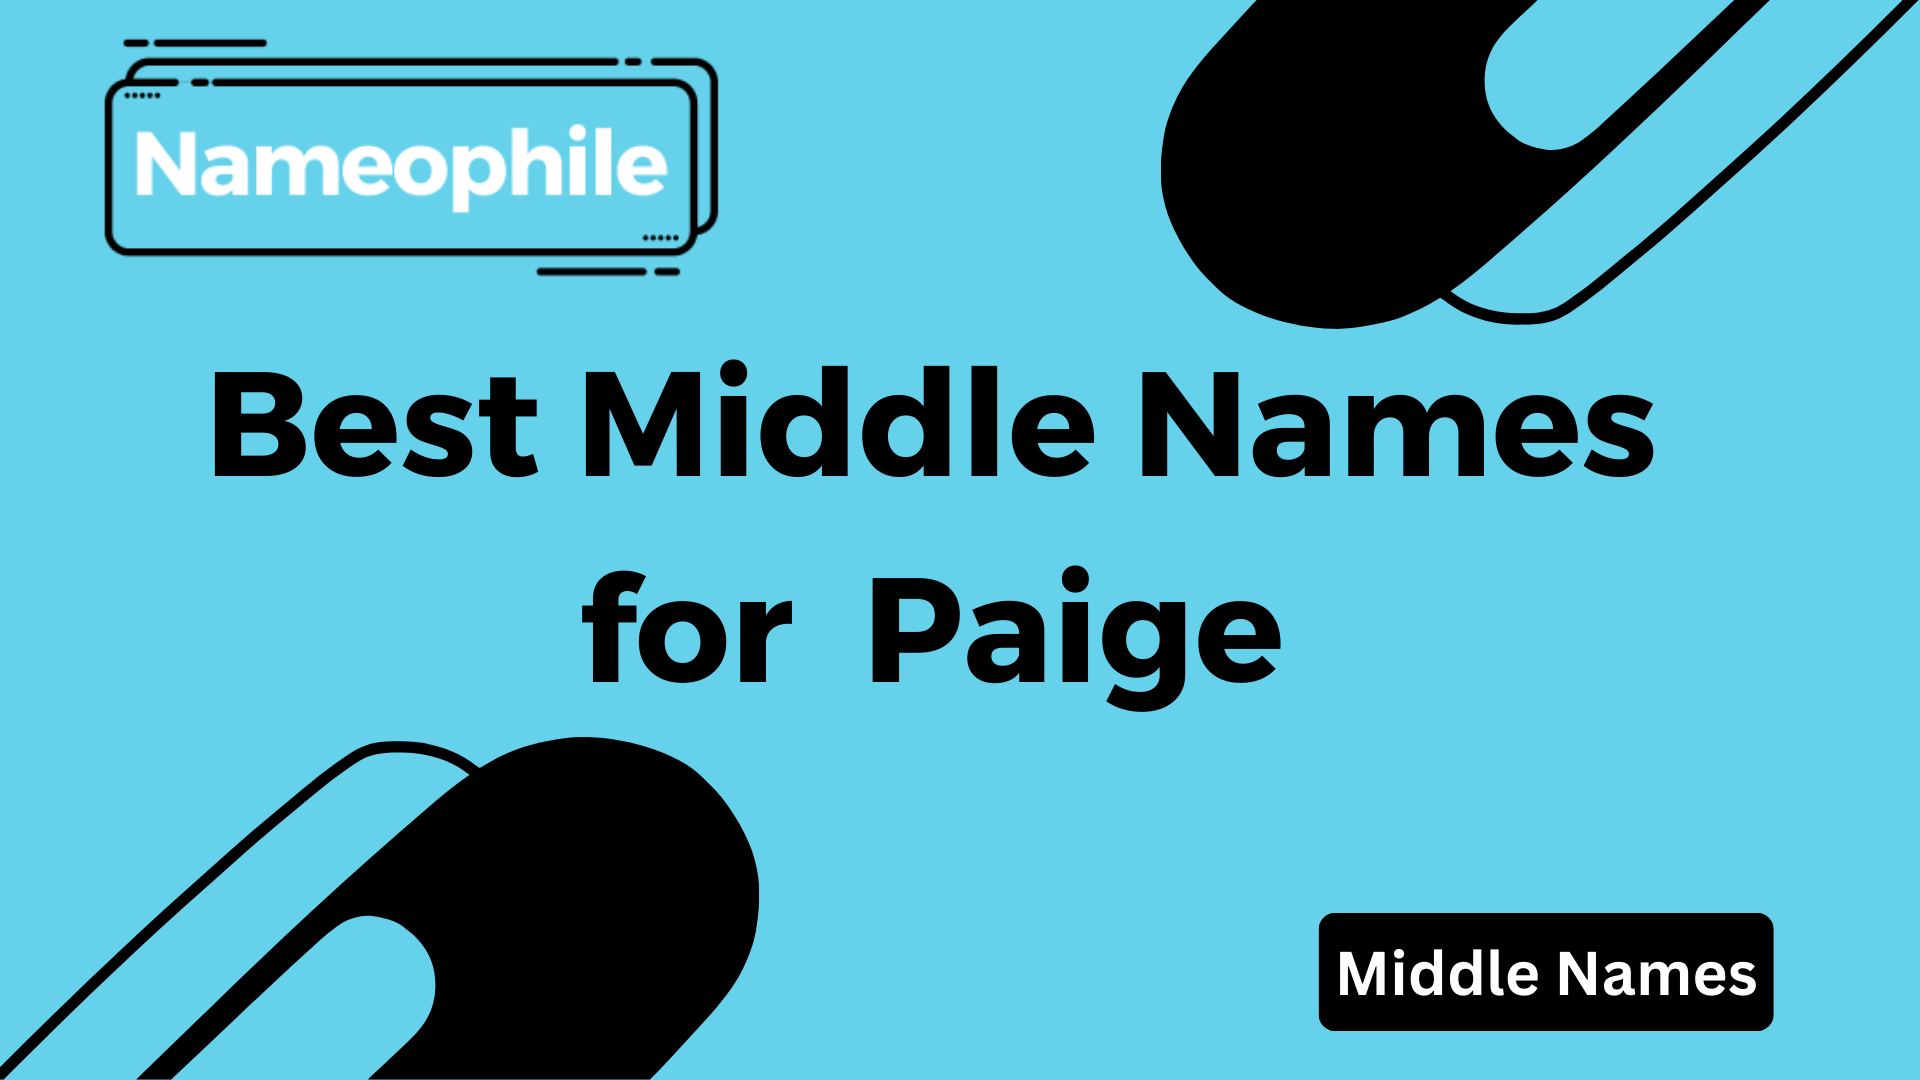 Best Middle Names for Paige